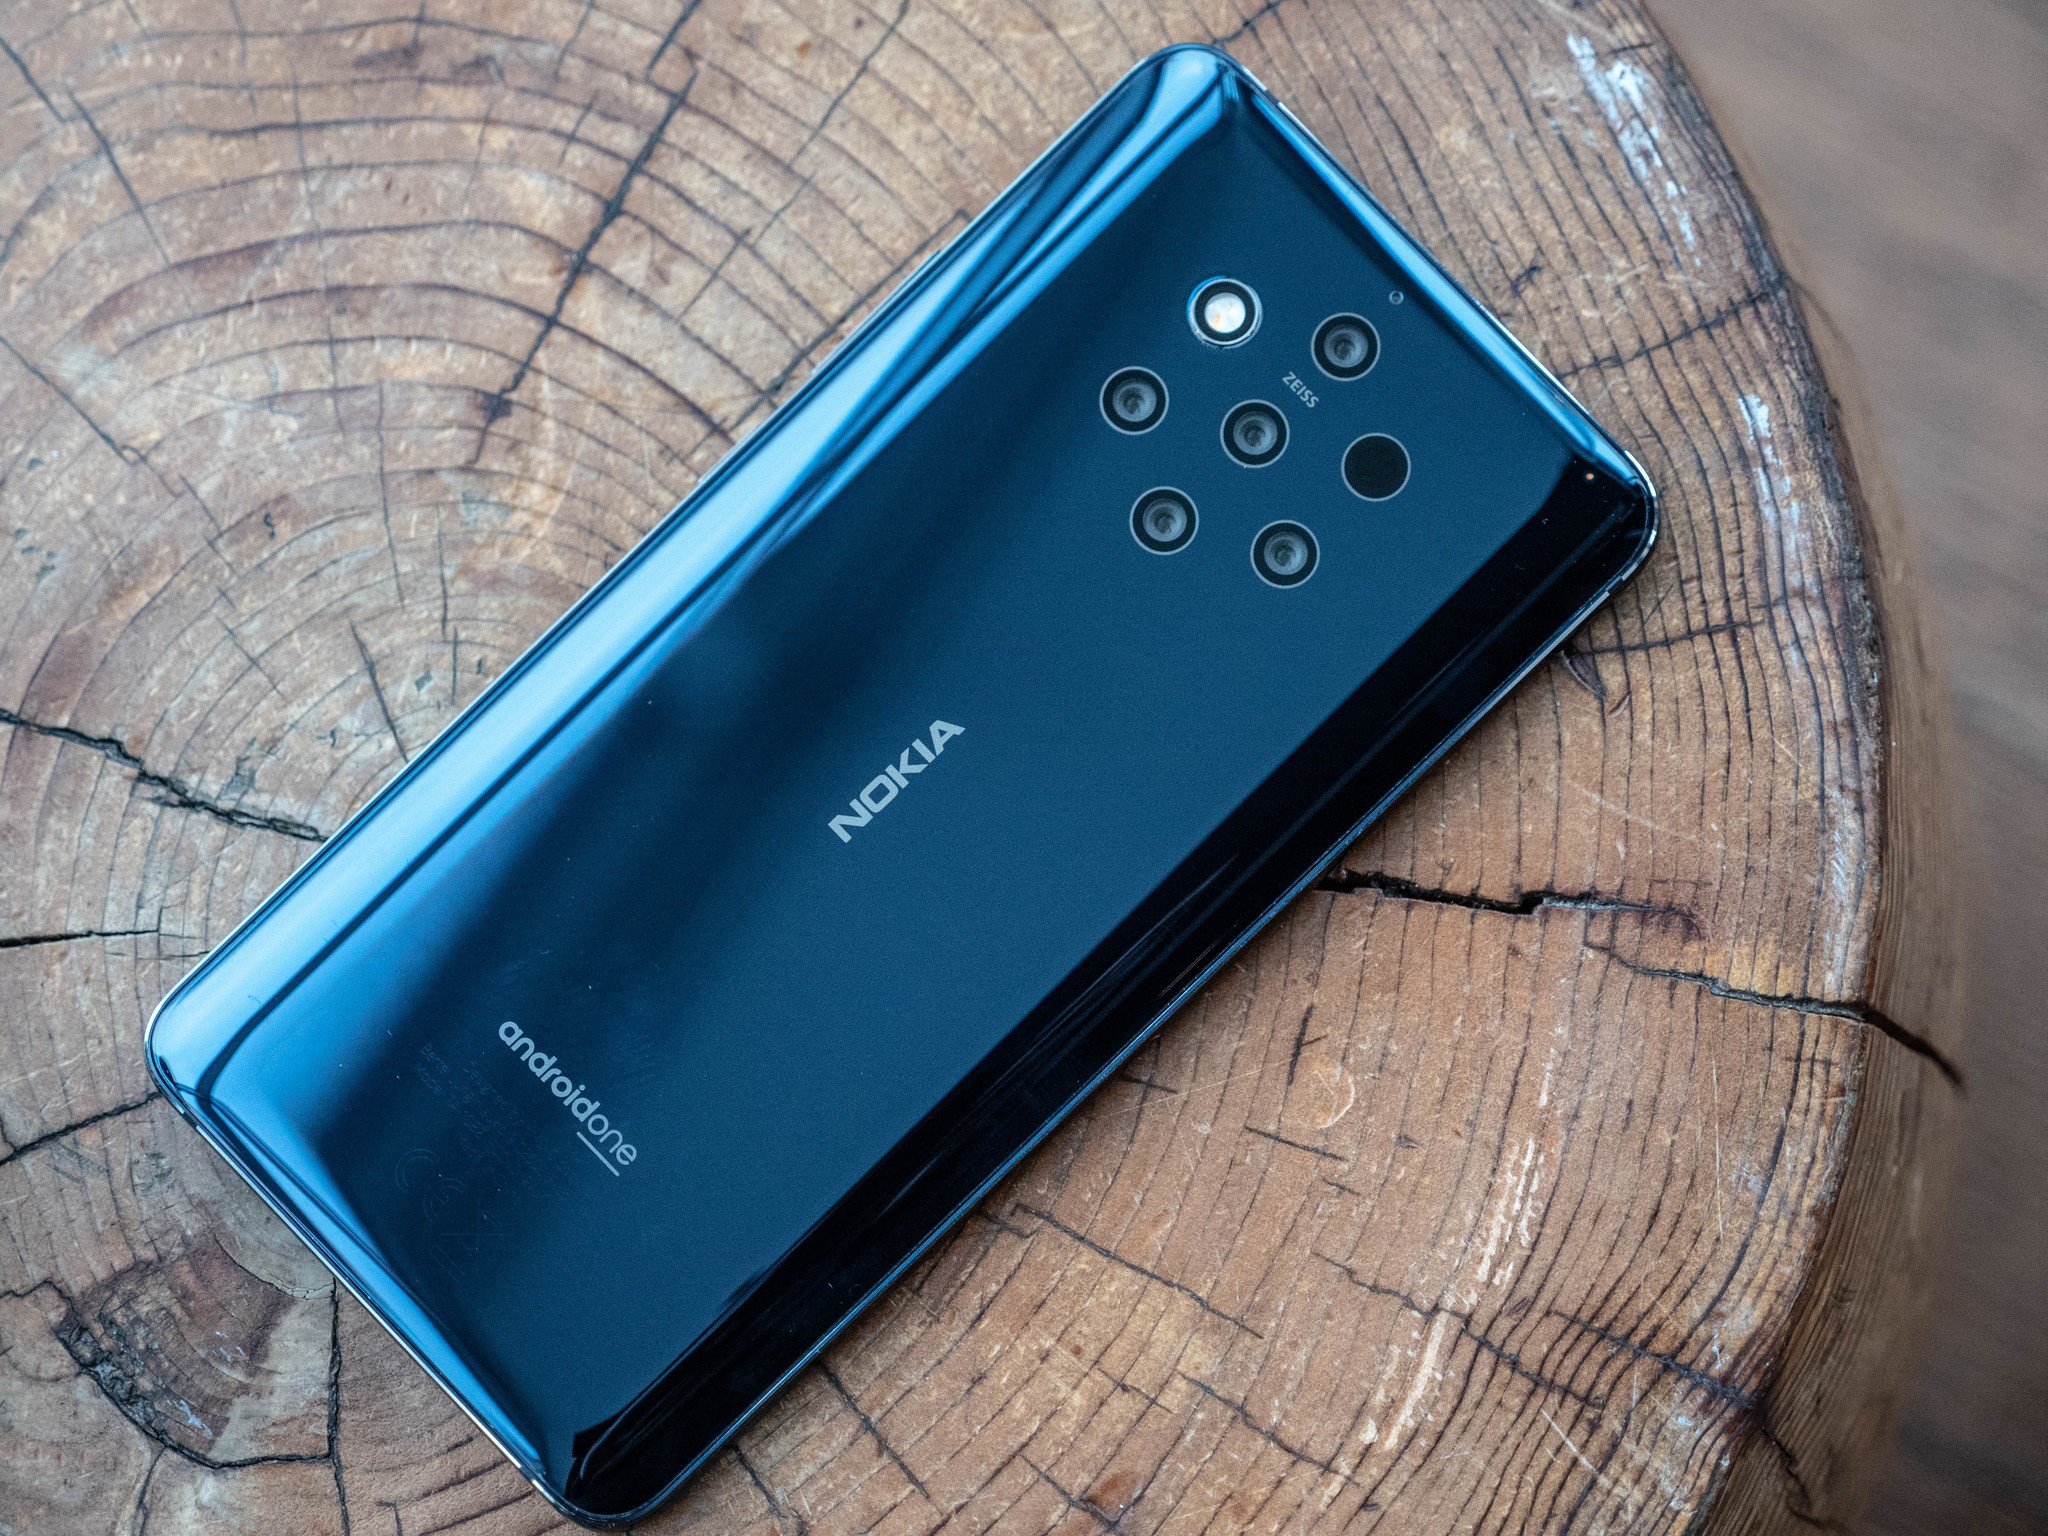 Nokia 9 Pureview Specs Five Cameras And Android One Android Central